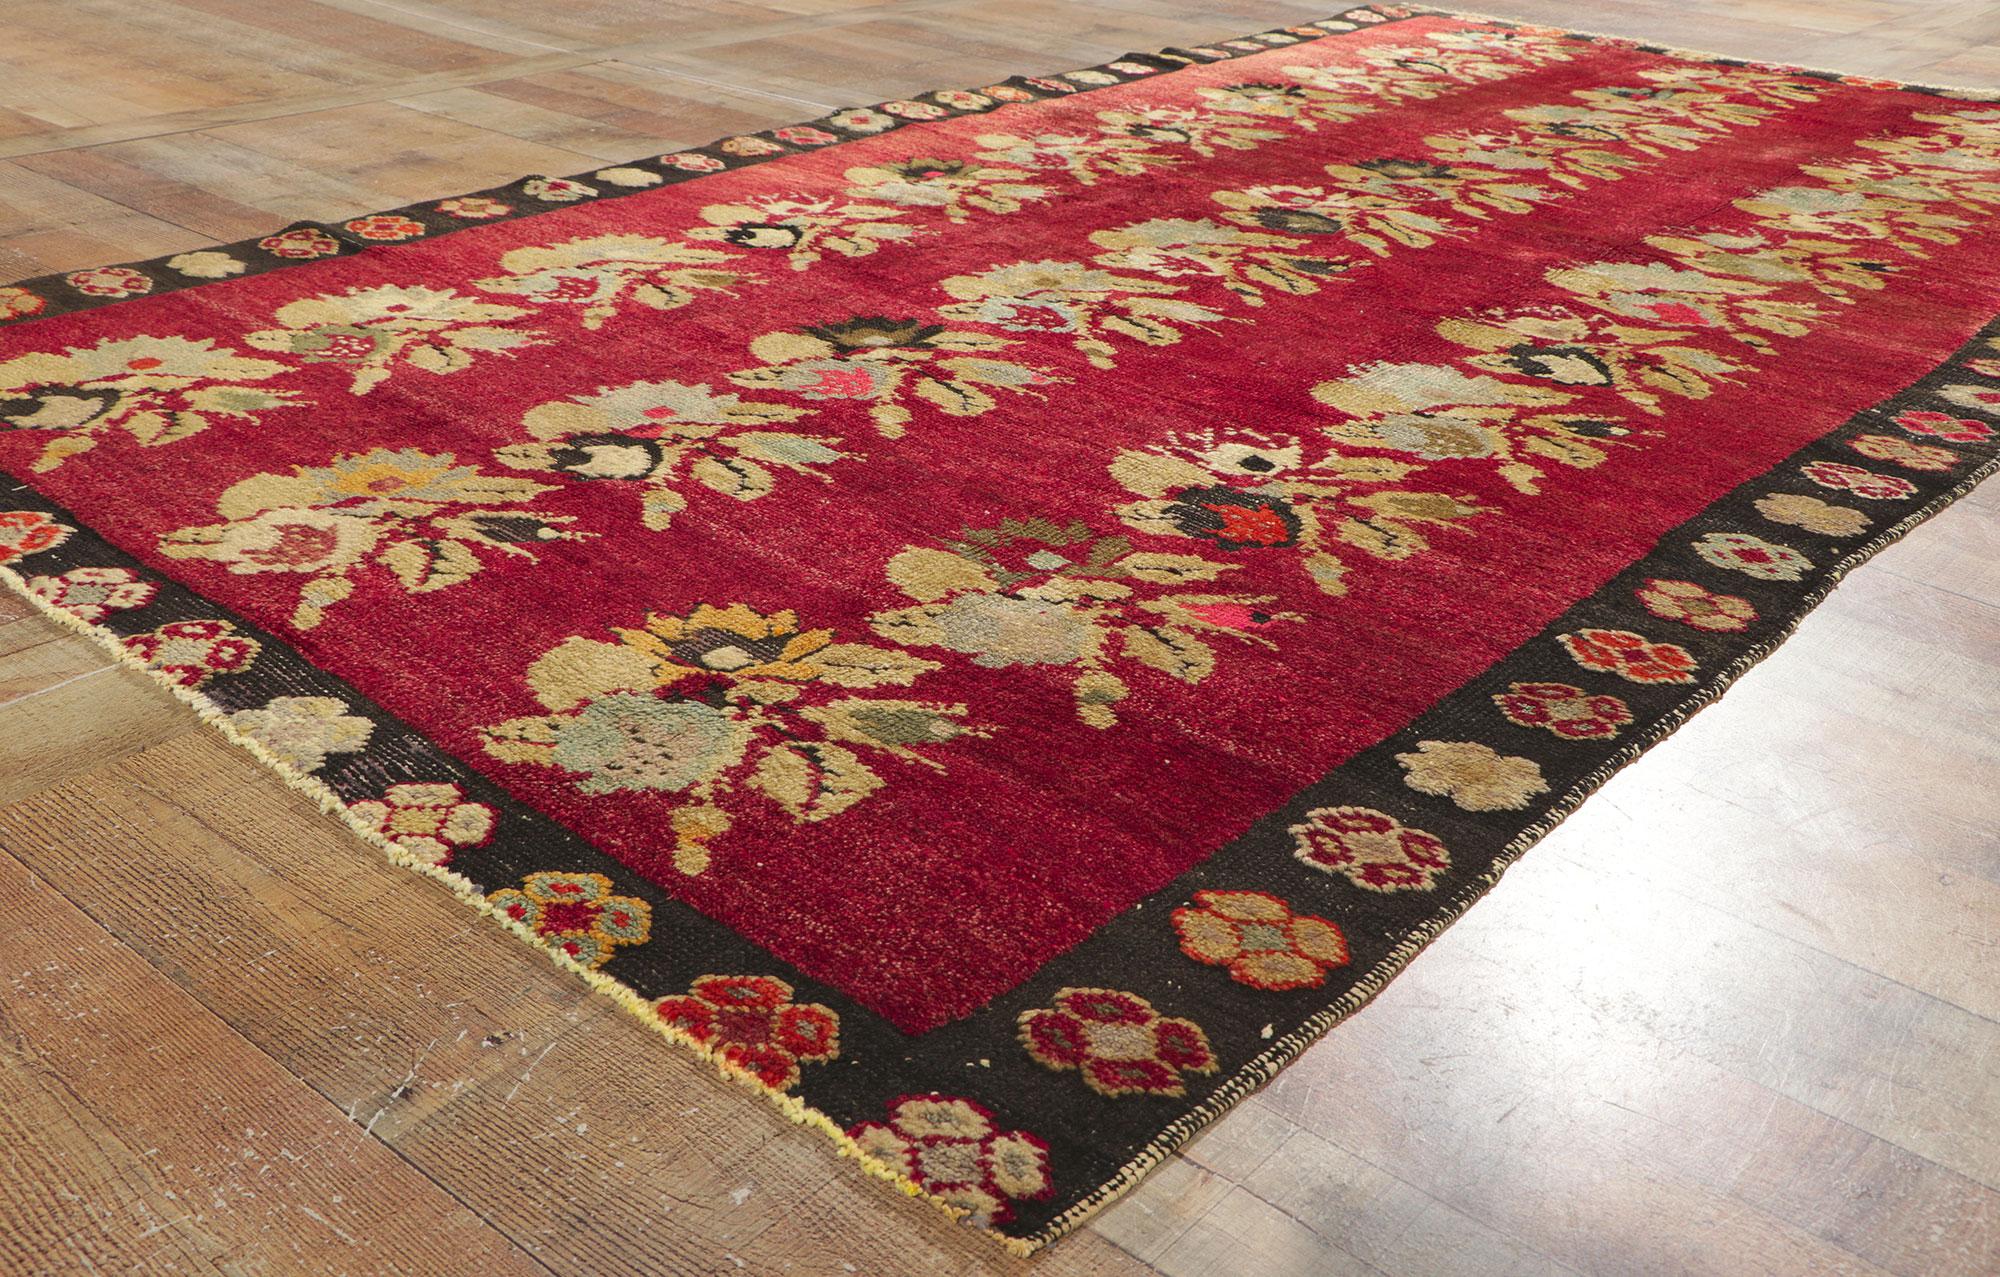 51670 Vintage Turkish Oushak Rug, 04.10 x 09.01.
Highlighting timeless style with incredible detail and texture, this hand knotted wool vintage Turkish Oushak rug is a captivating vision of woven beauty. The Traditional Design and colorway woven